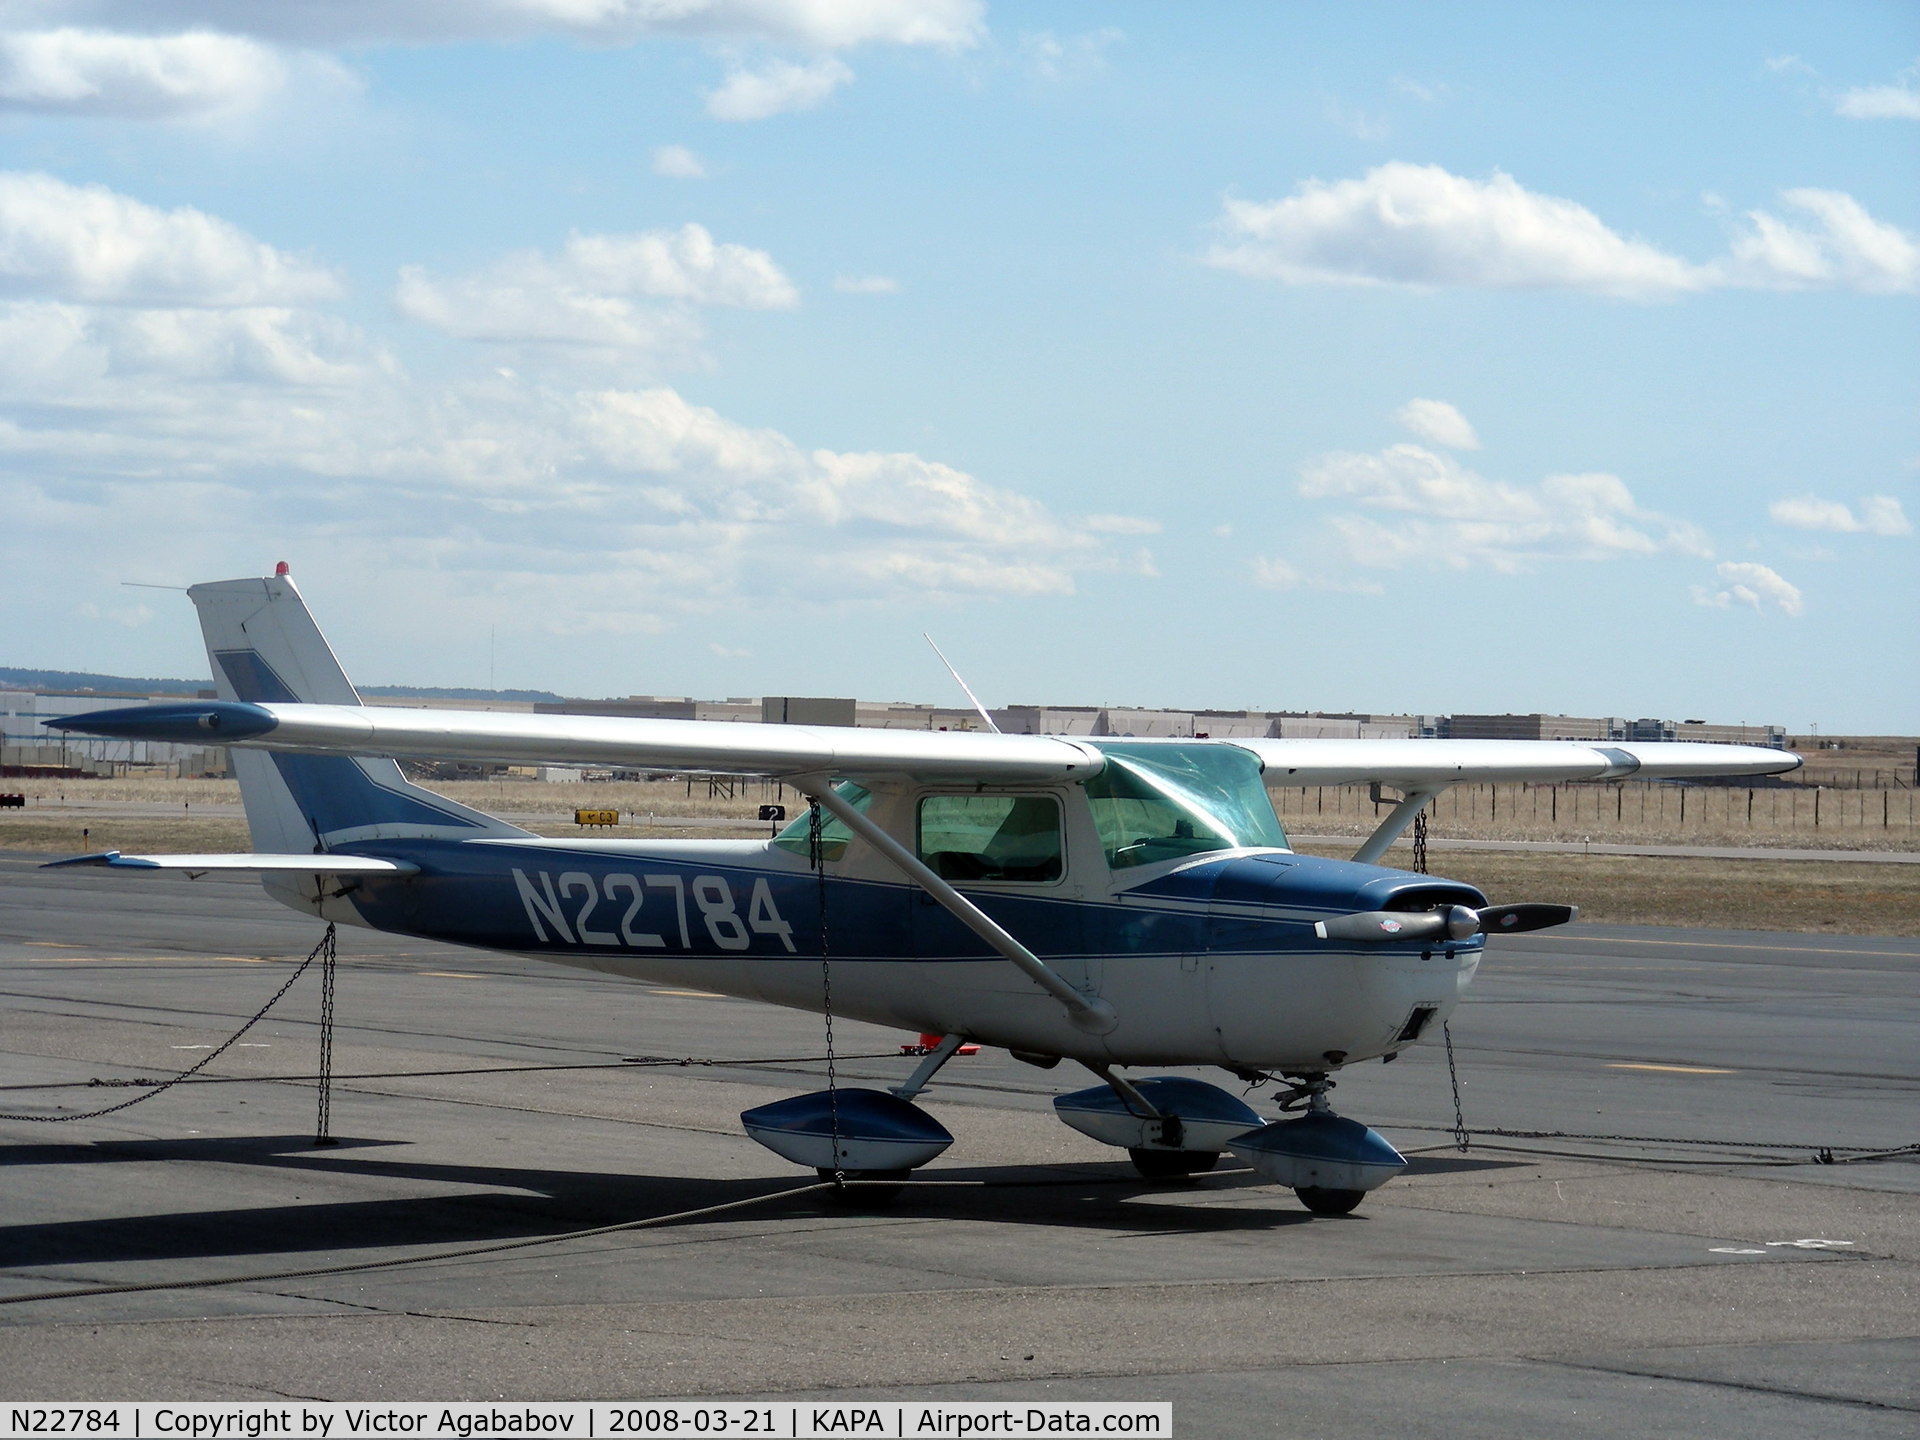 N22784, 1968 Cessna 150H C/N 15068512, Parked at ramp along taxiway Charlie